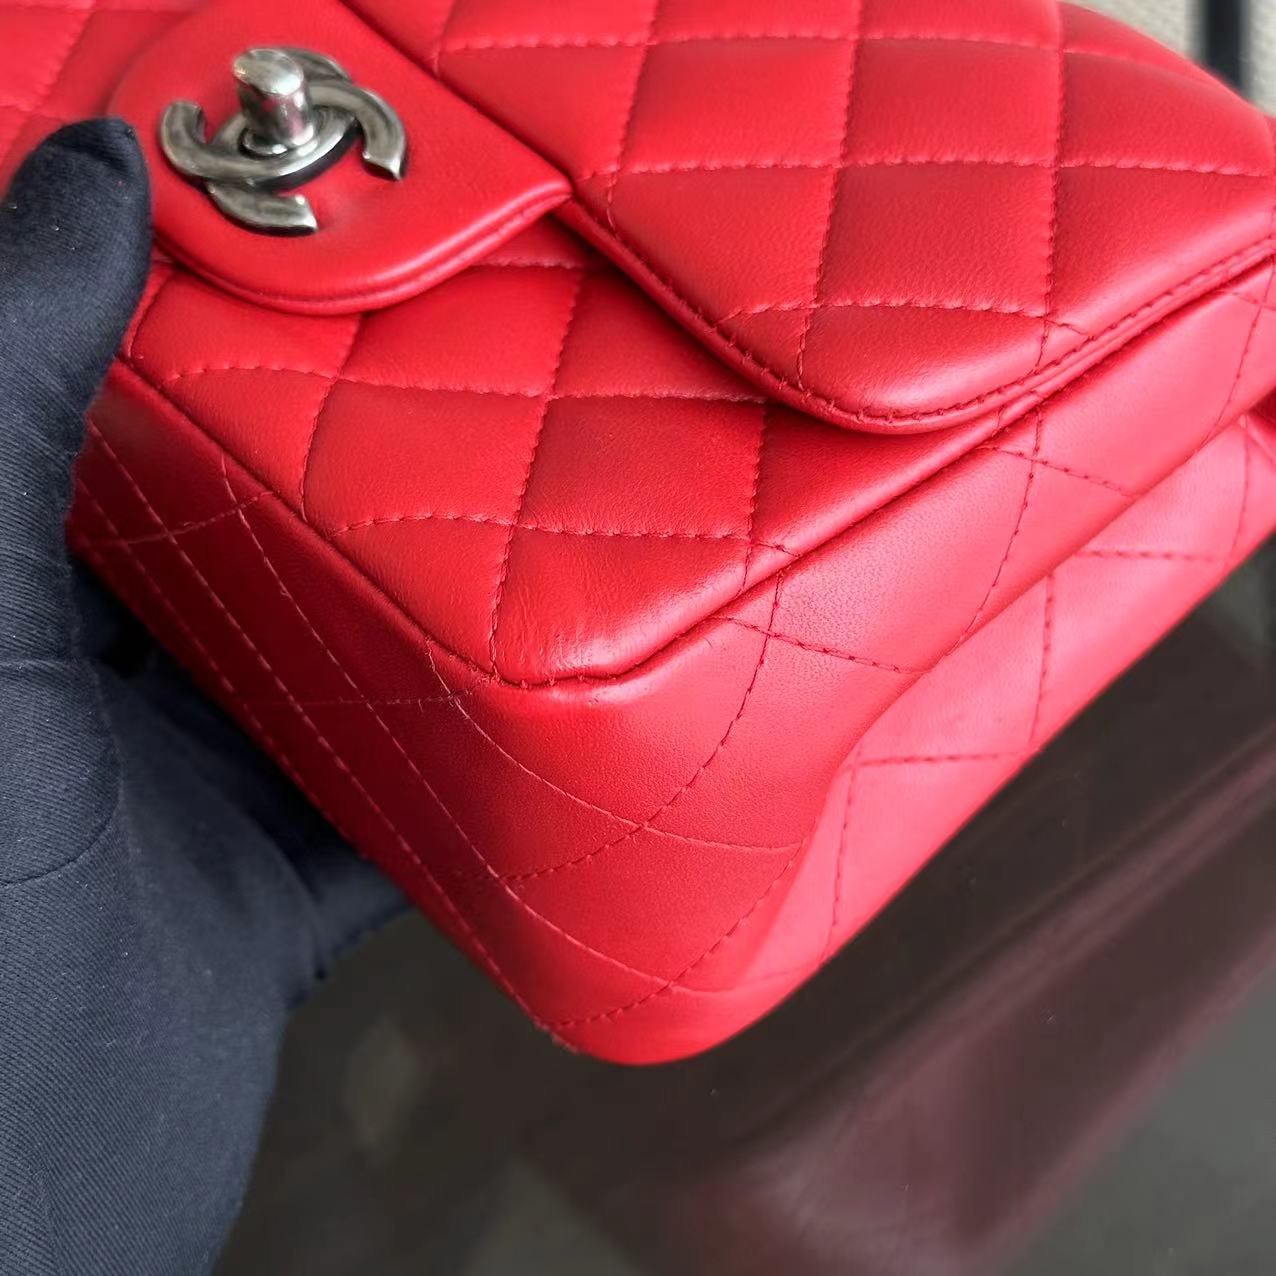 Chanel Mini Square Classic Flap Quilted Lambskin Red RSHW No 20